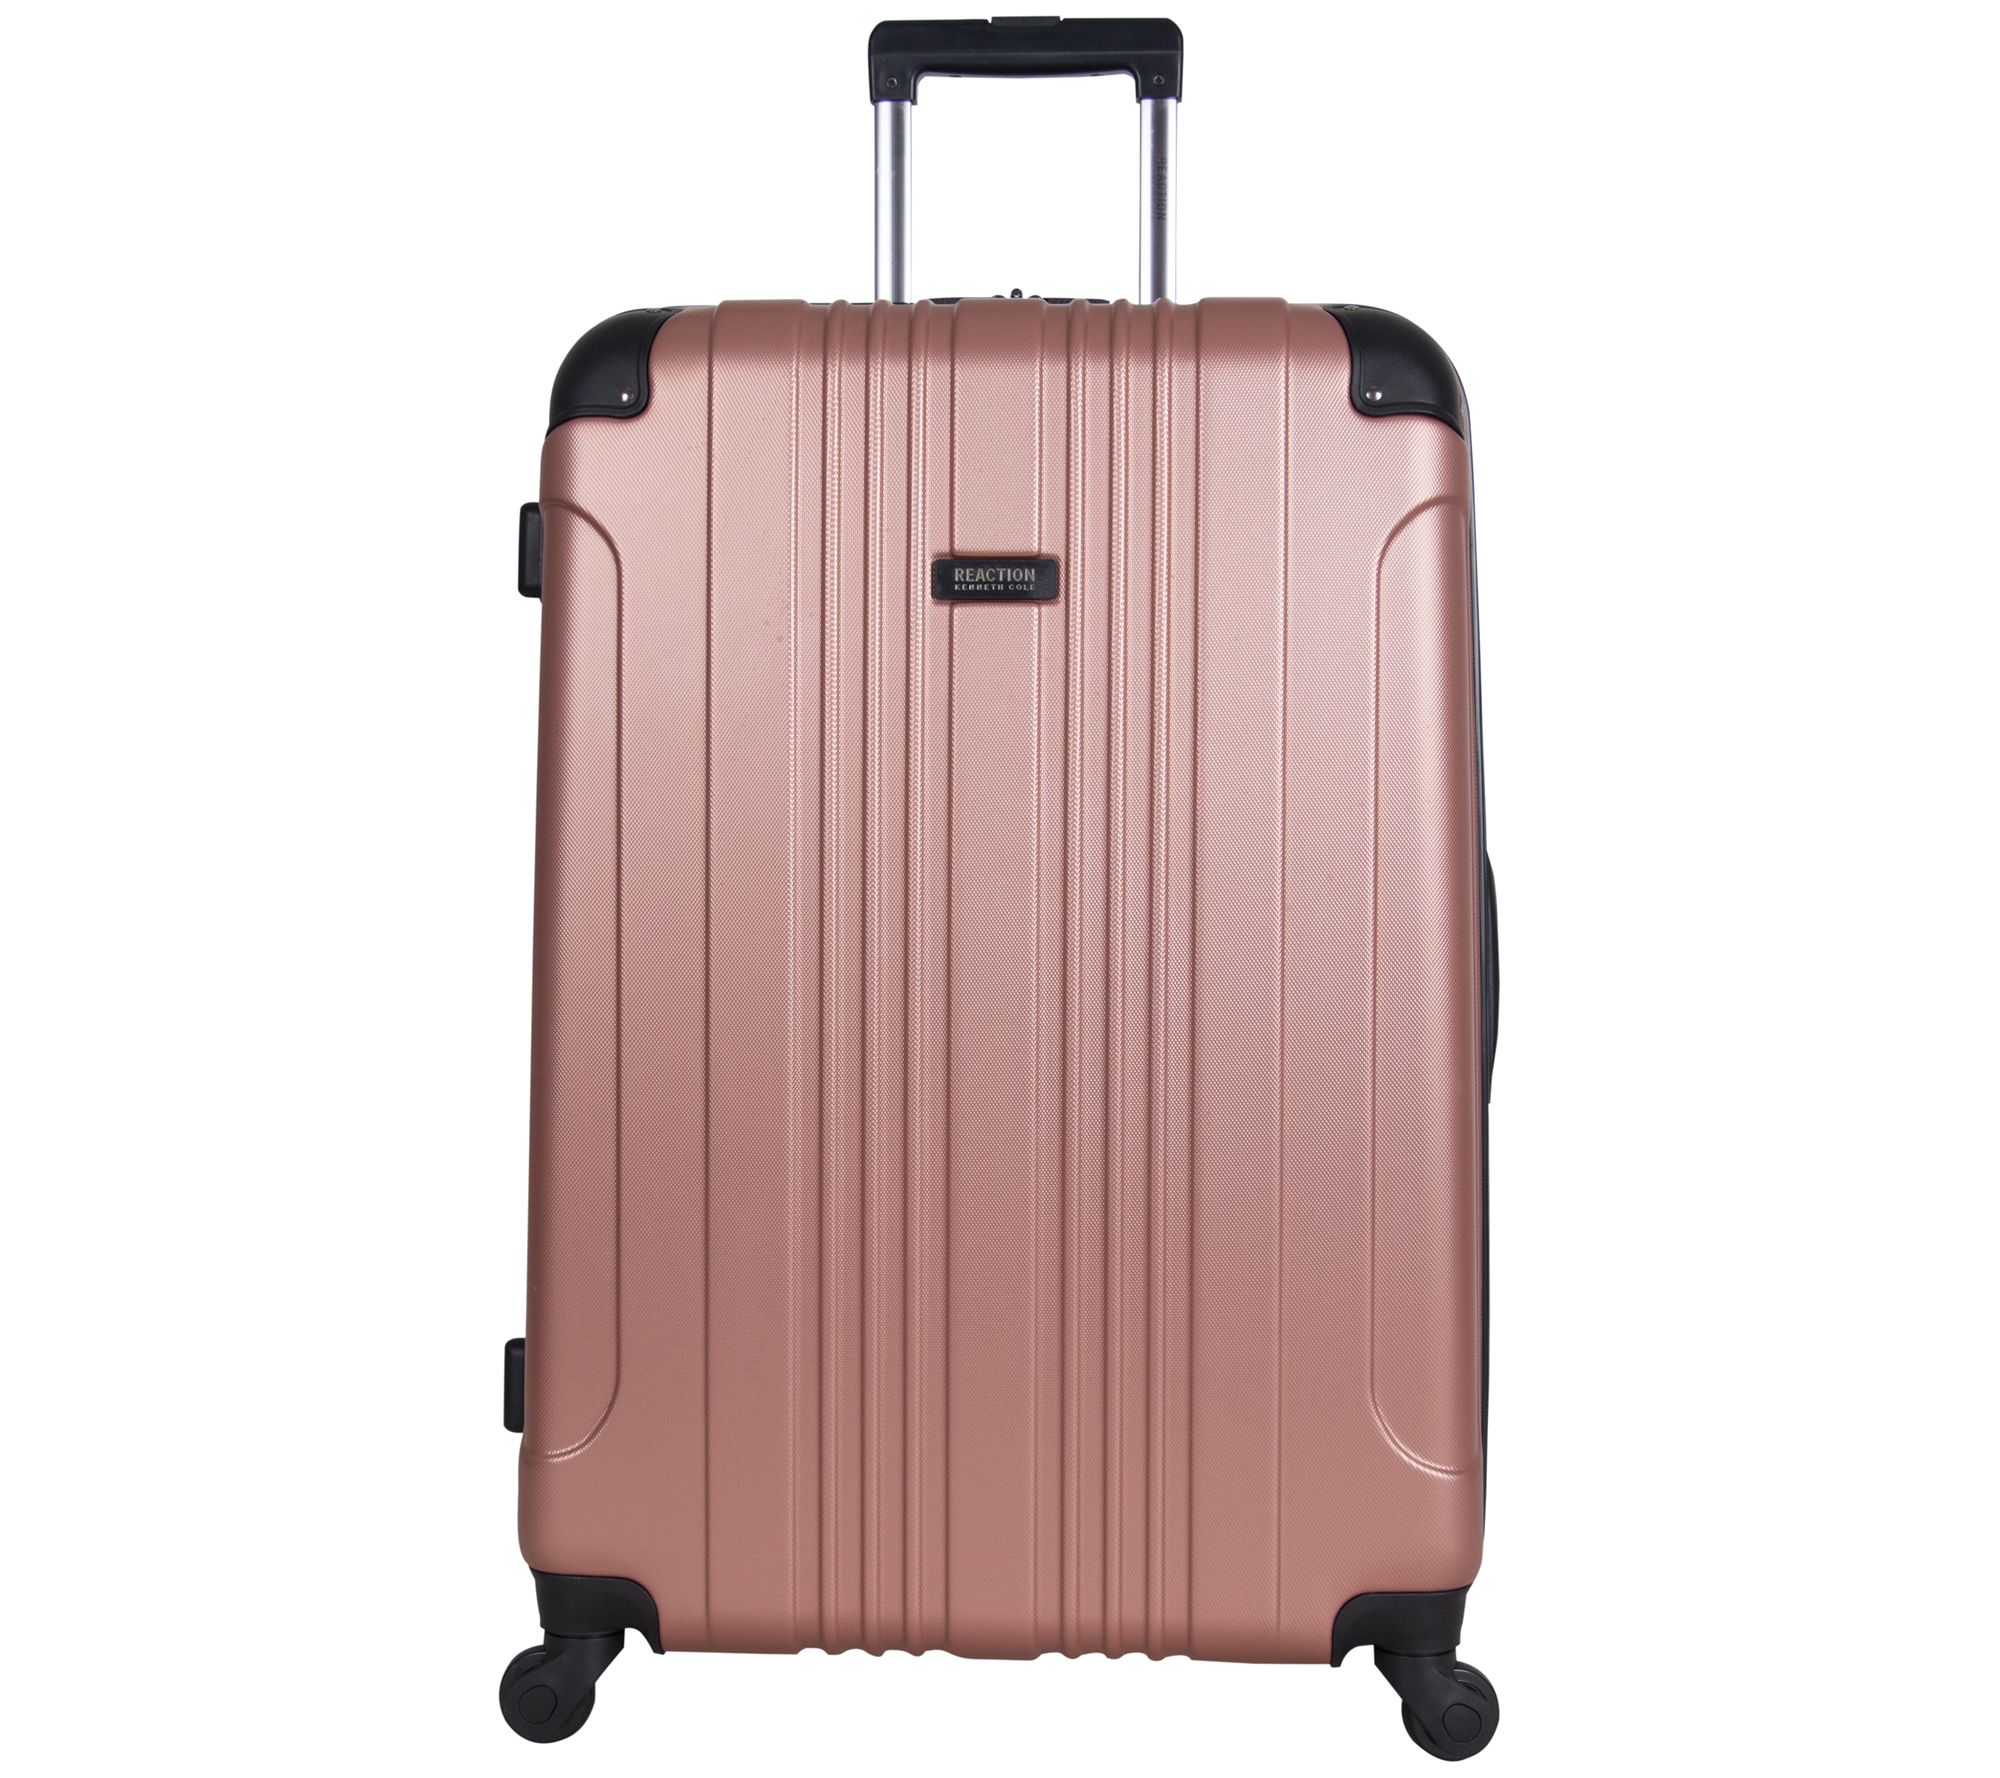 Kenneth Cole Out Of Bounds 3-Piece Luggage Set